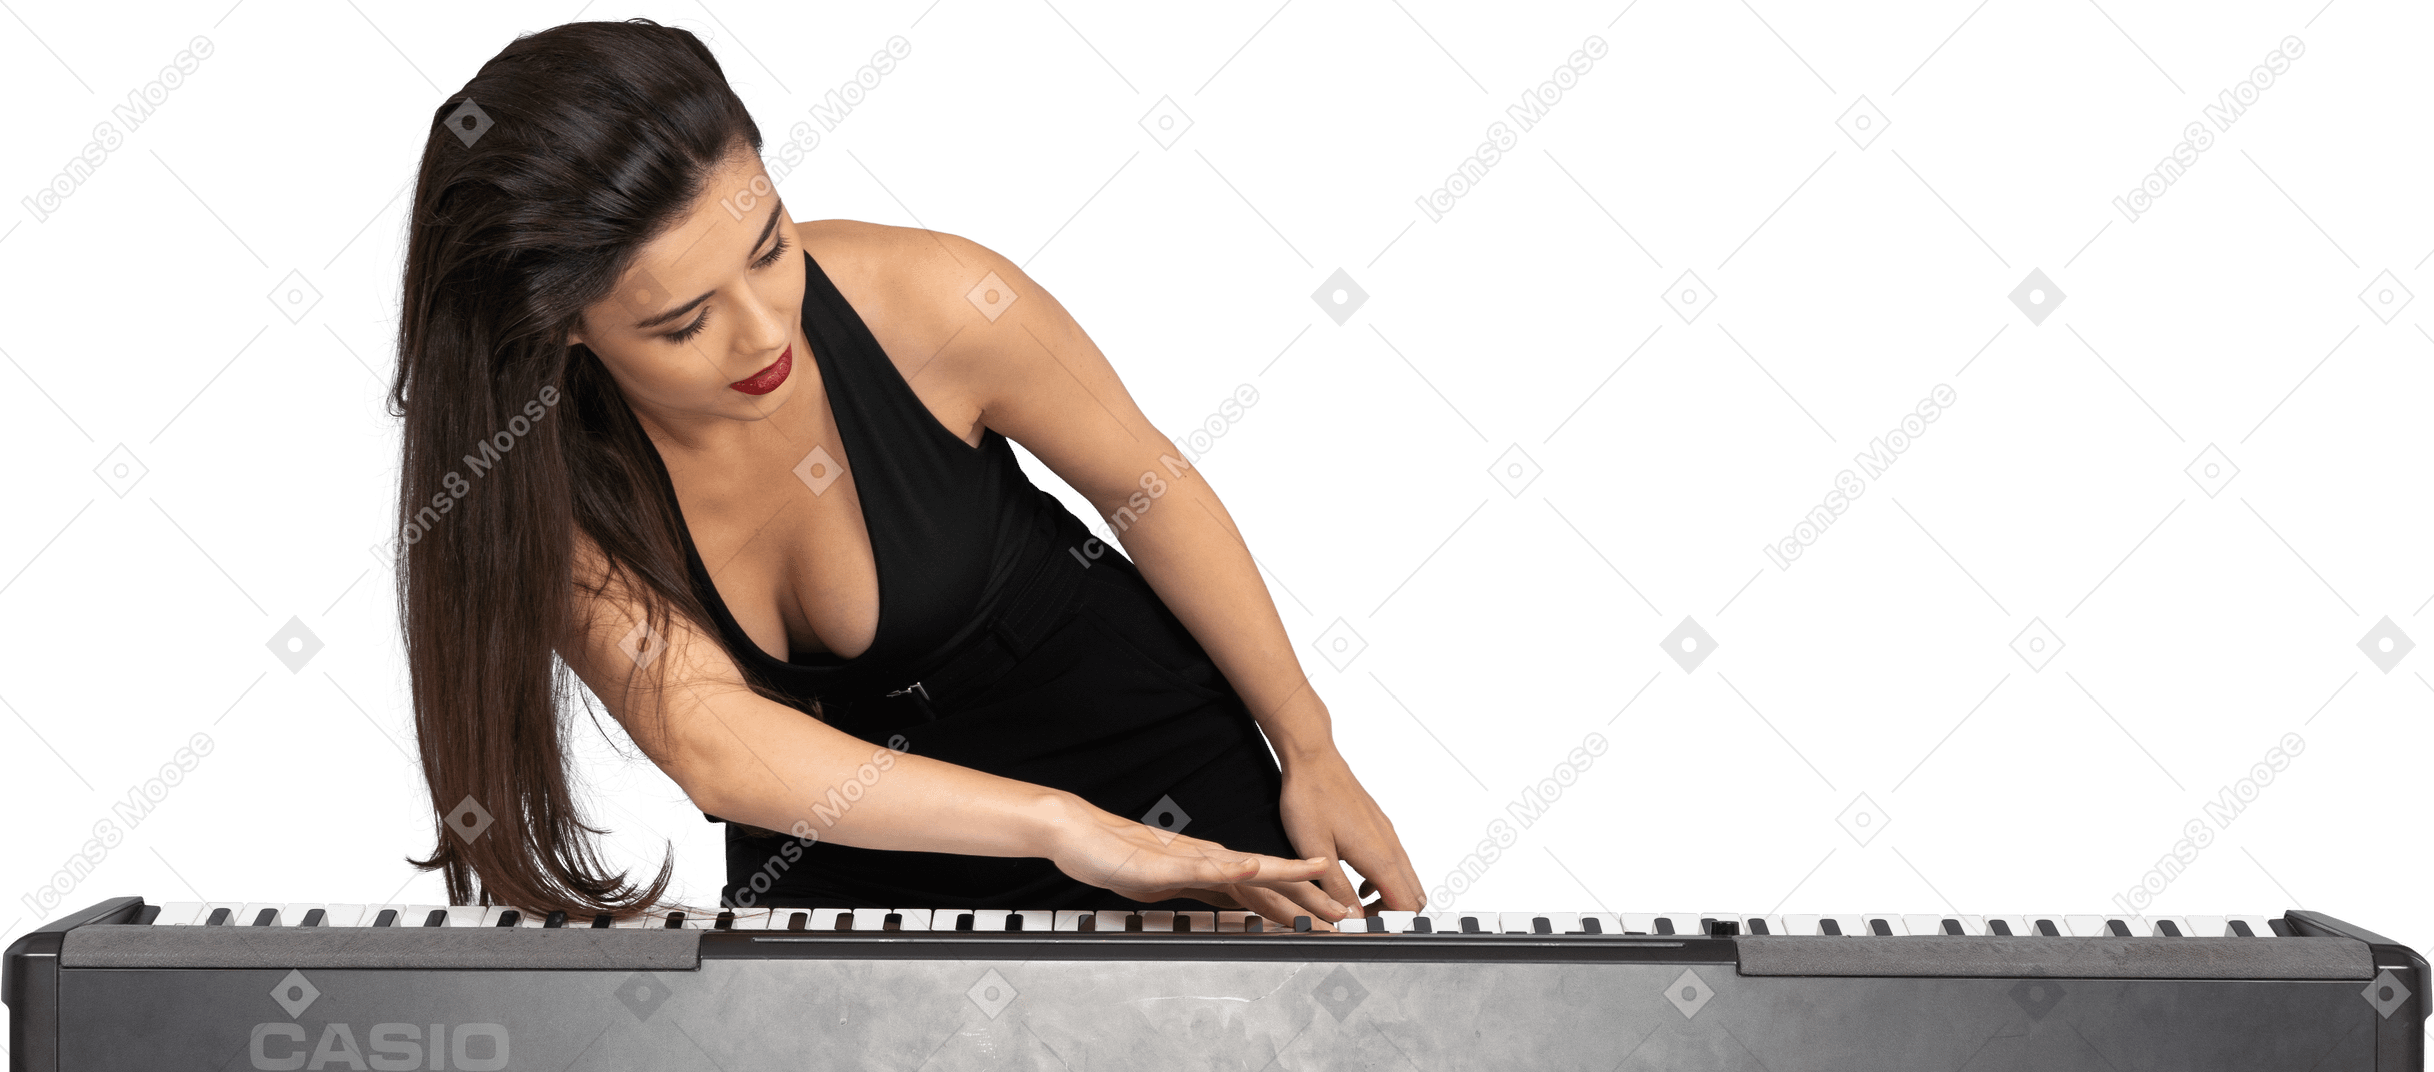 Front view of a young lady in black dress putting her hand on keyboard